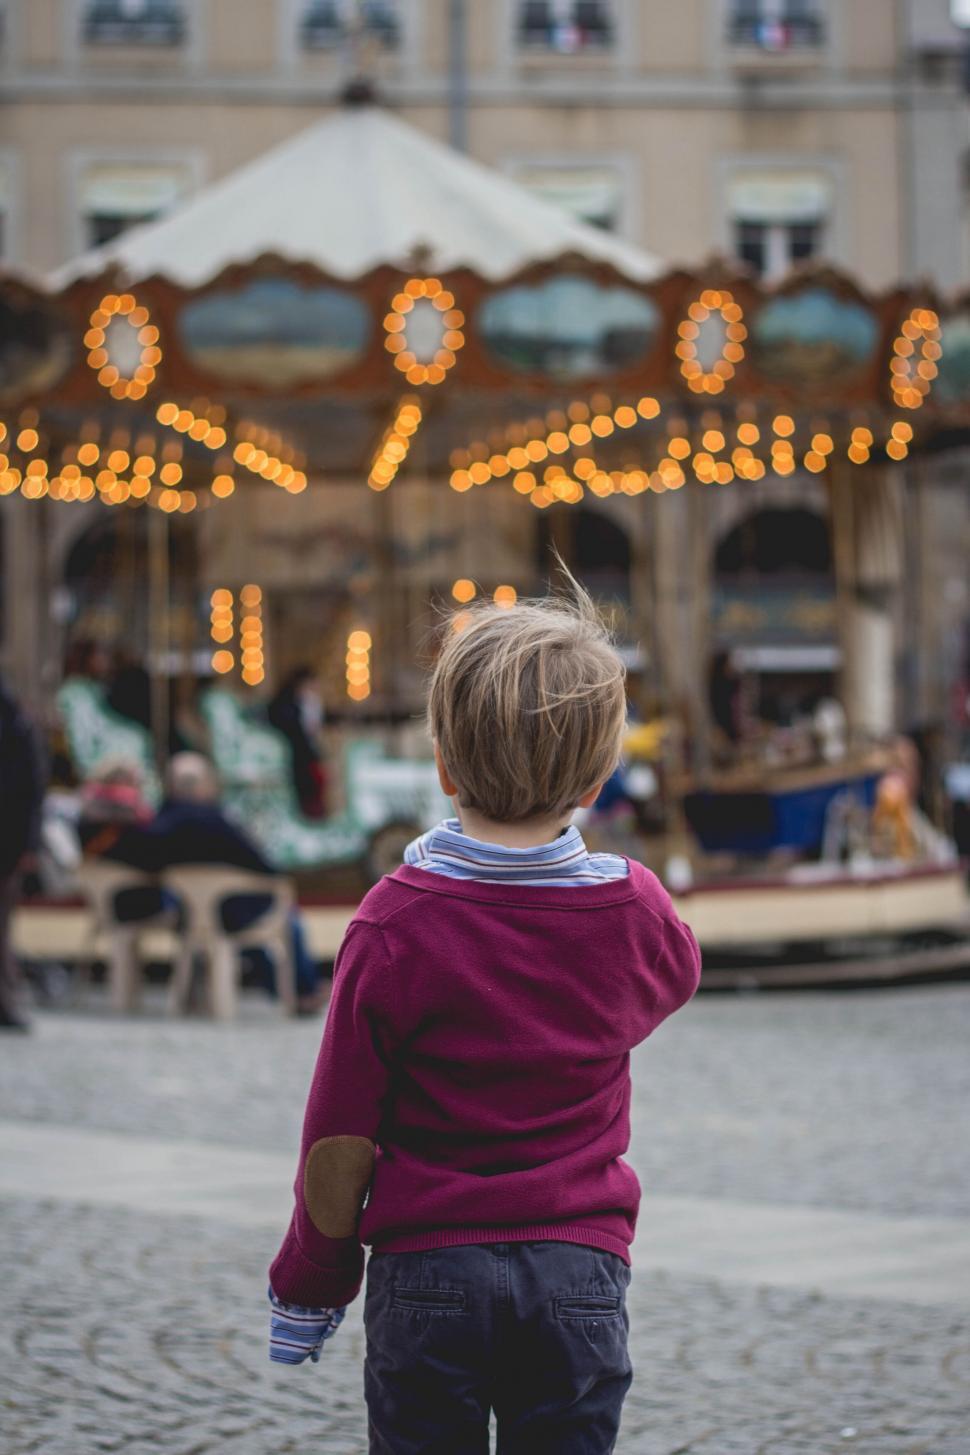 Free Image of Child looking towards a merry-go-round 